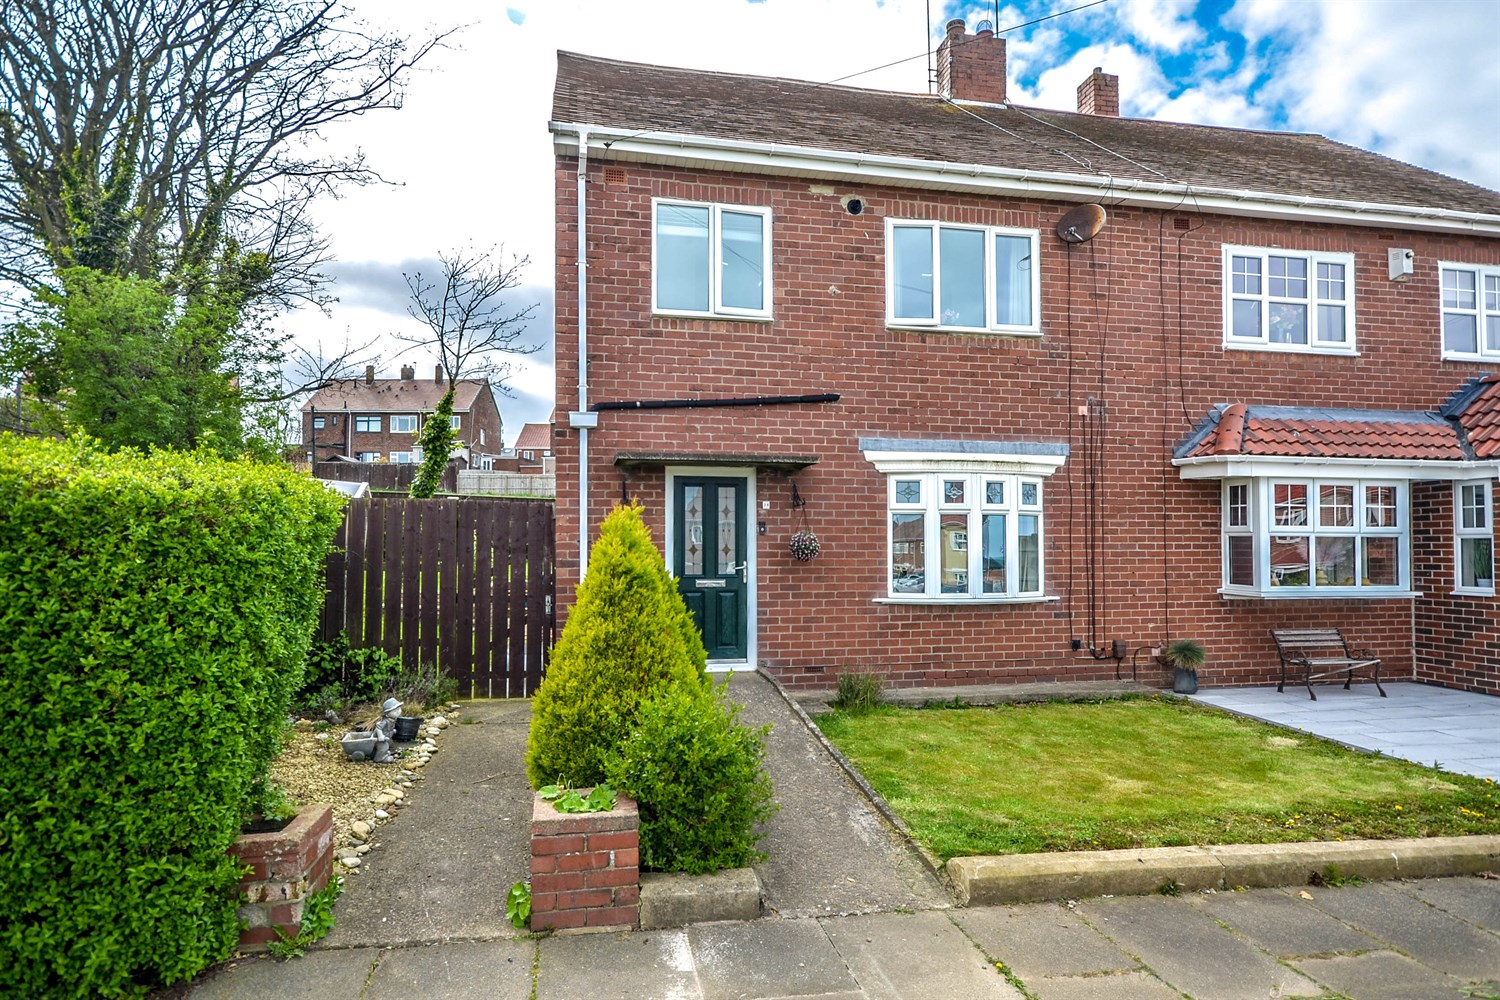 3 bed semi-detached house for sale in Norfolk Road, South Shields - Property Image 1